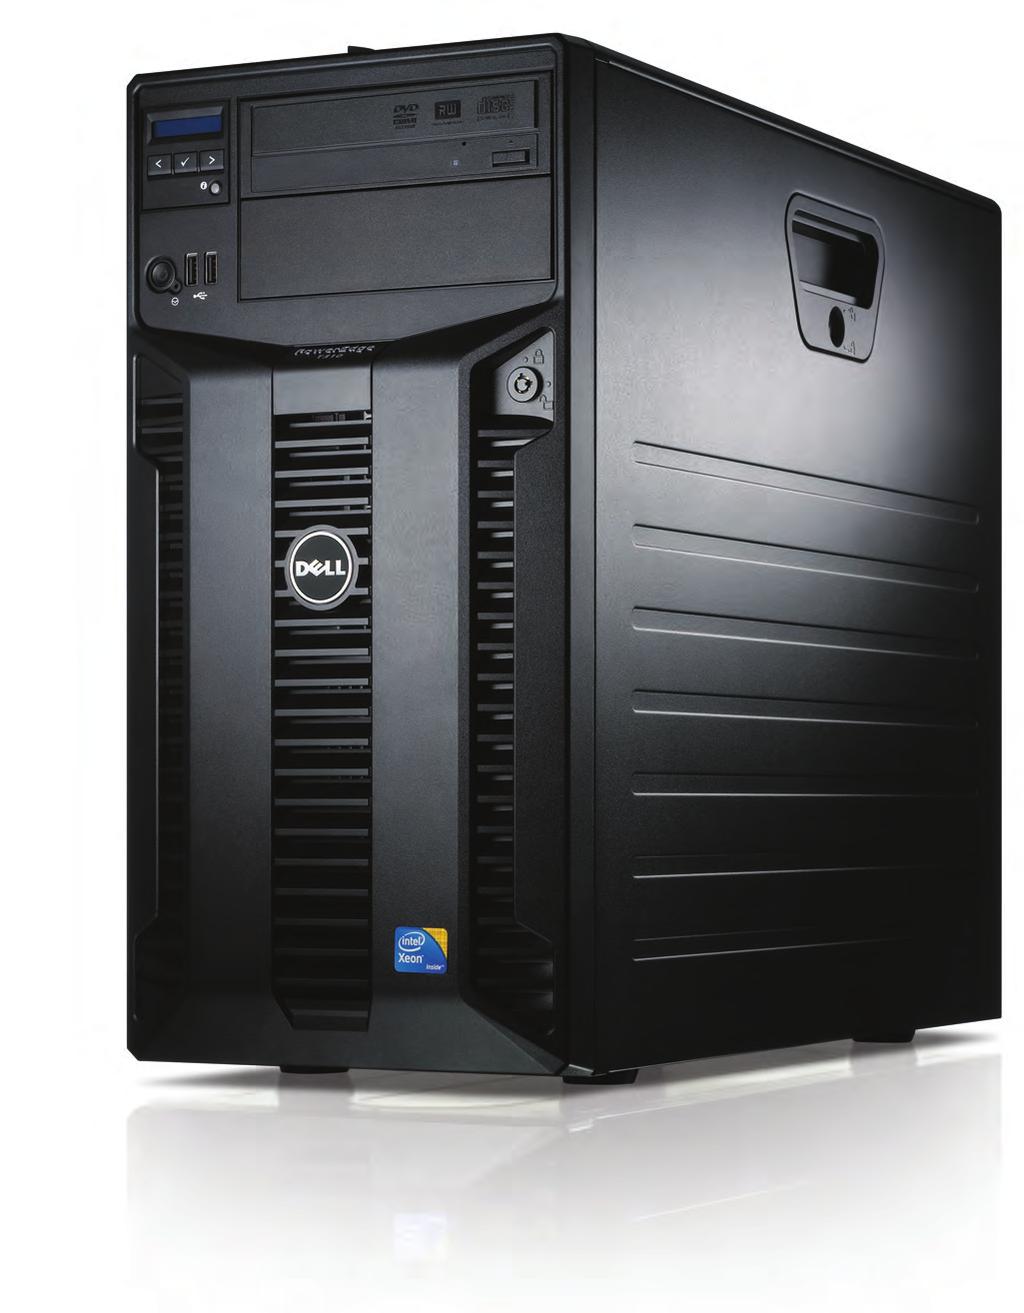 PowerEdge Tower Servers Achieve Unprecedented Value Dell provides a complete tower server portfolio with a wide choice of performance and functionality, providing you with a solid foundation to run